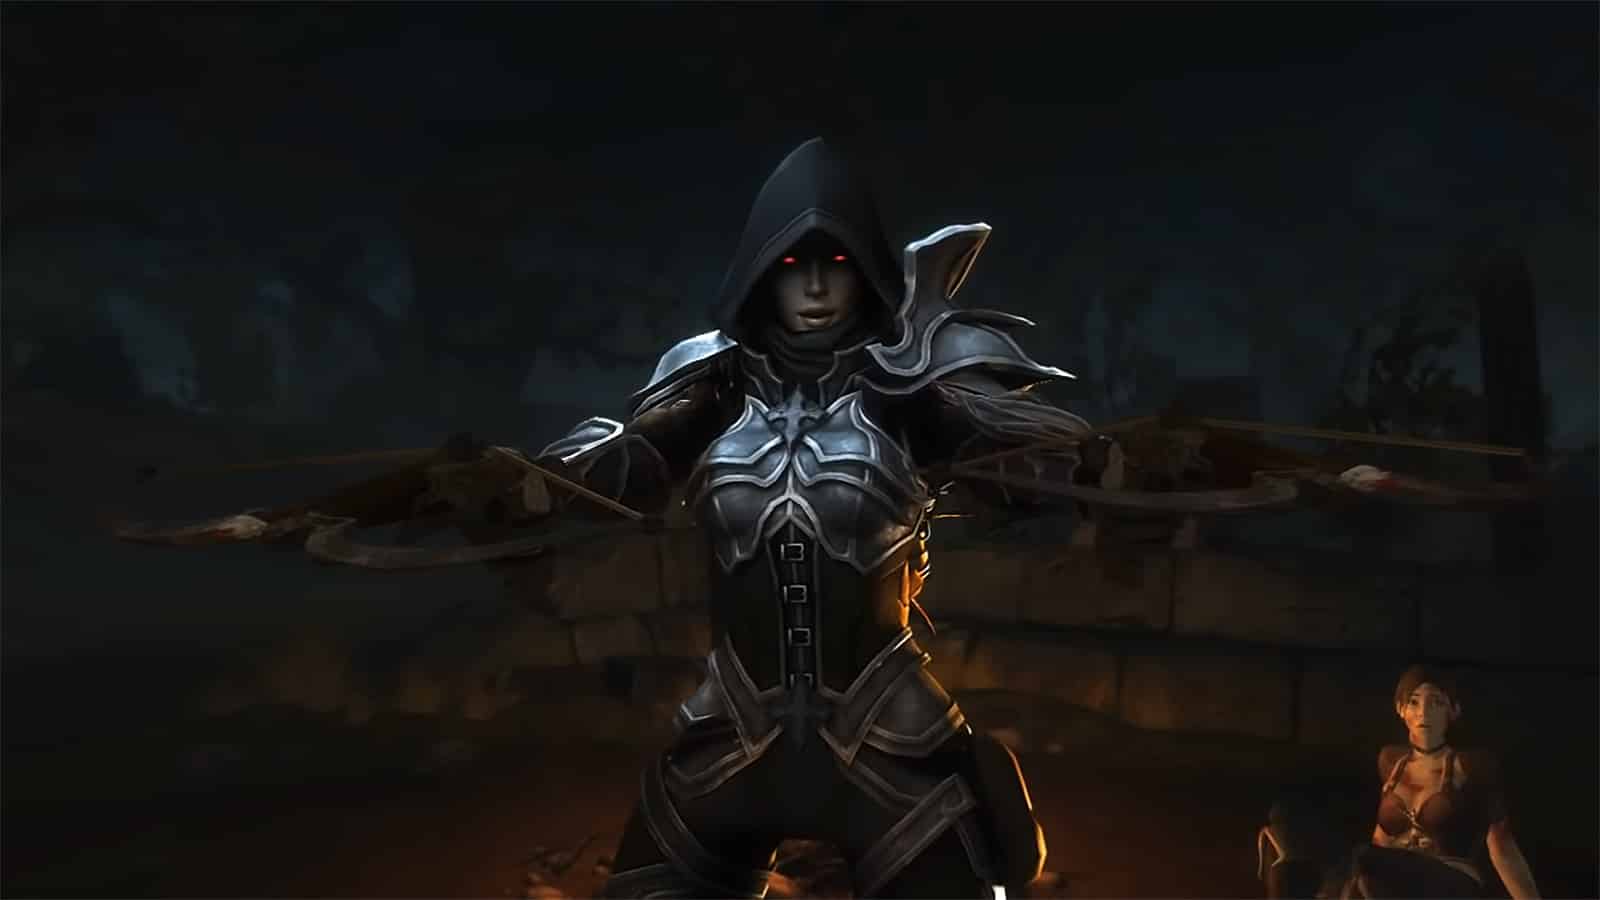 An image of the Demon Hunter from Diablo 3 gameplay trailer